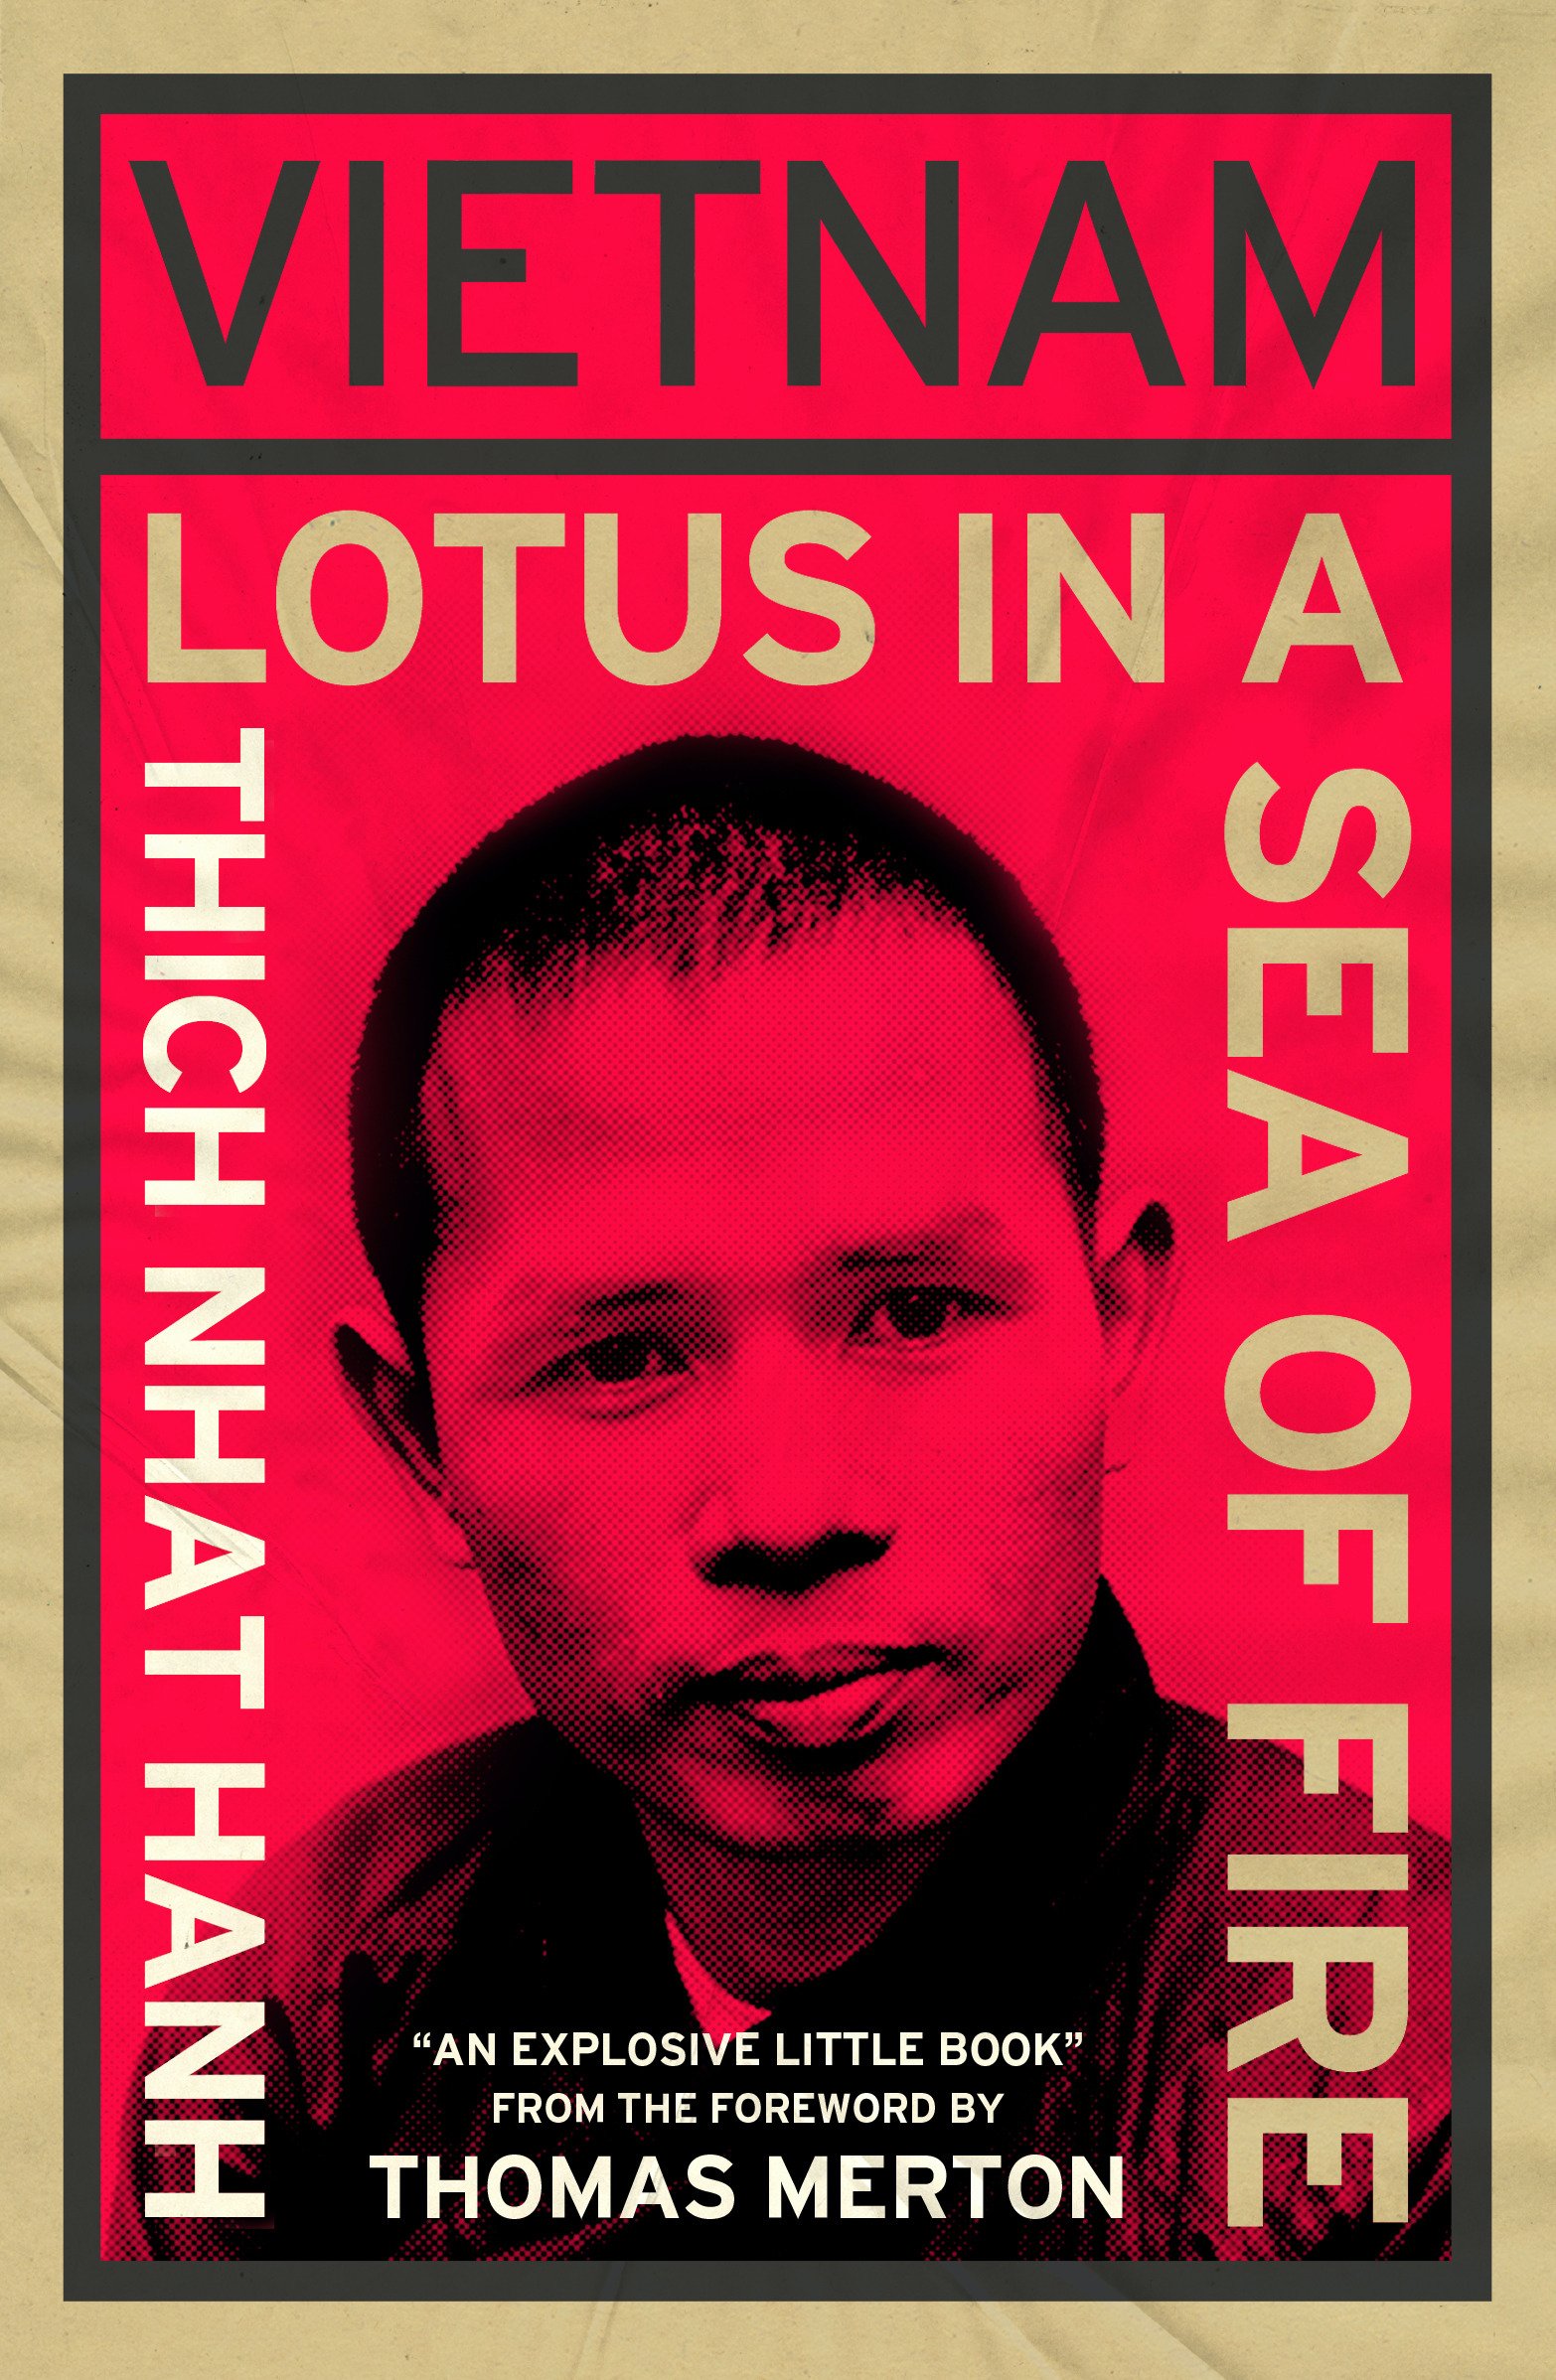 Vietnam: Lotus in a Sea of Fire : A Buddhist Proposal for Peace | Nhat Hanh, Thich